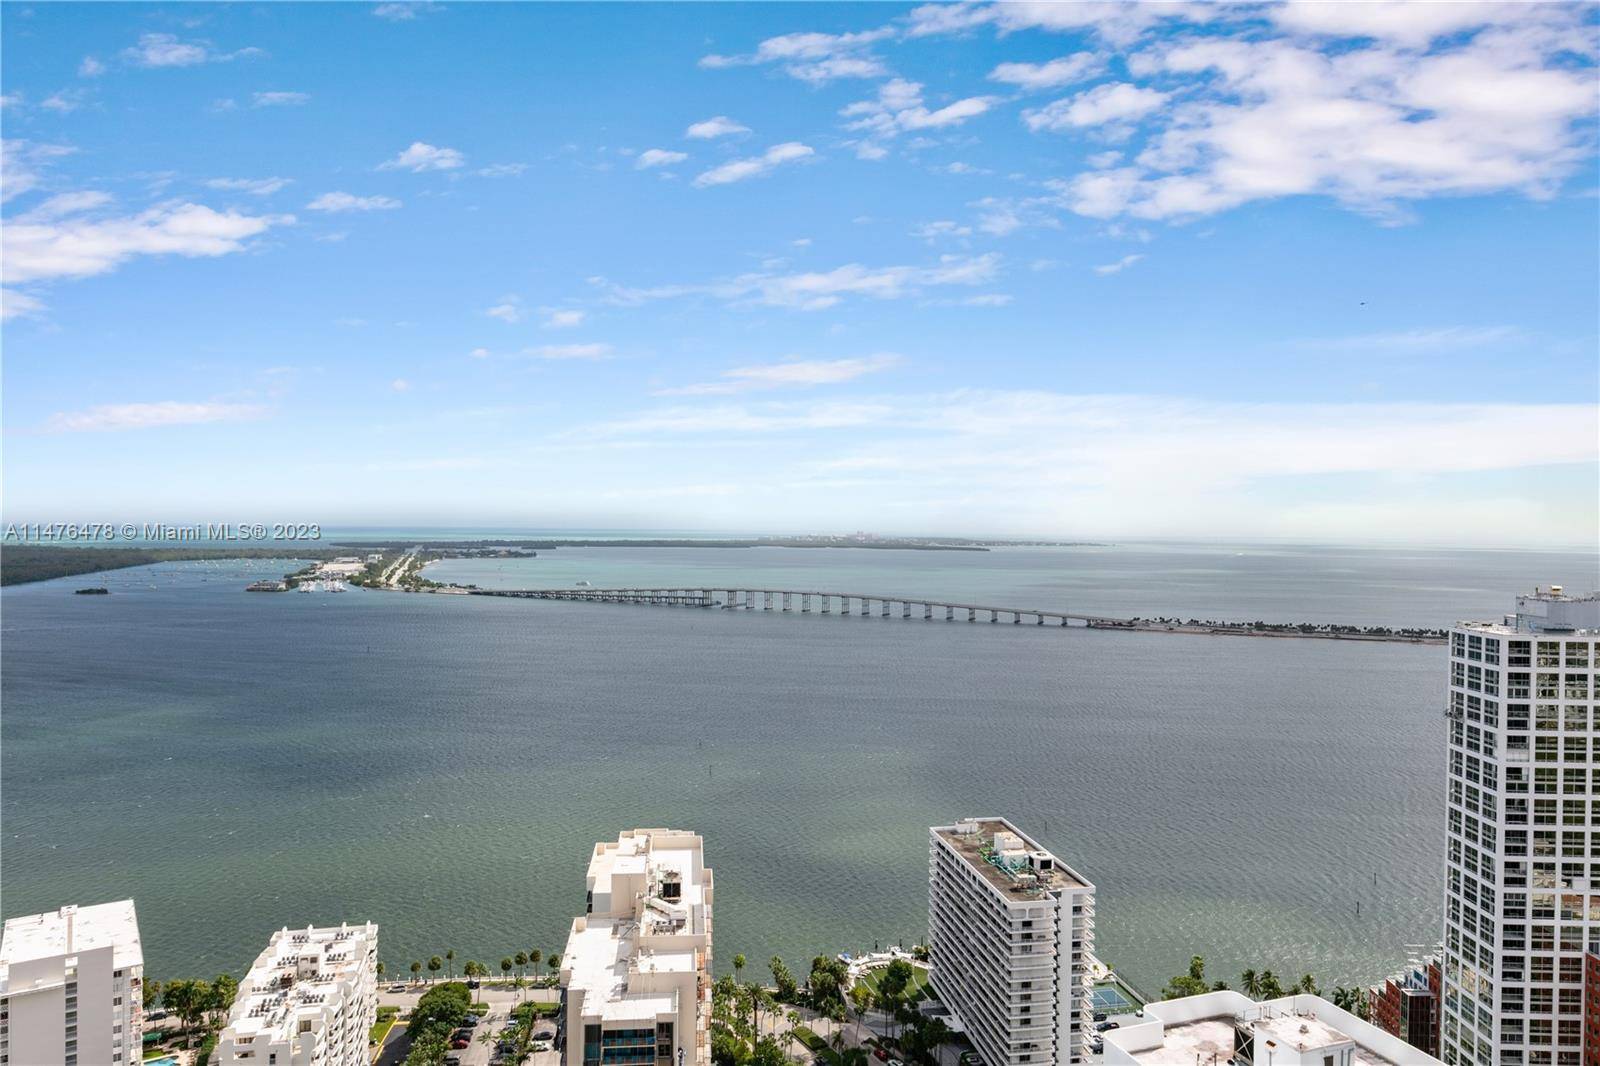 Experience luxury living at Four Seasons Residence in Brickell, Miami, FL.